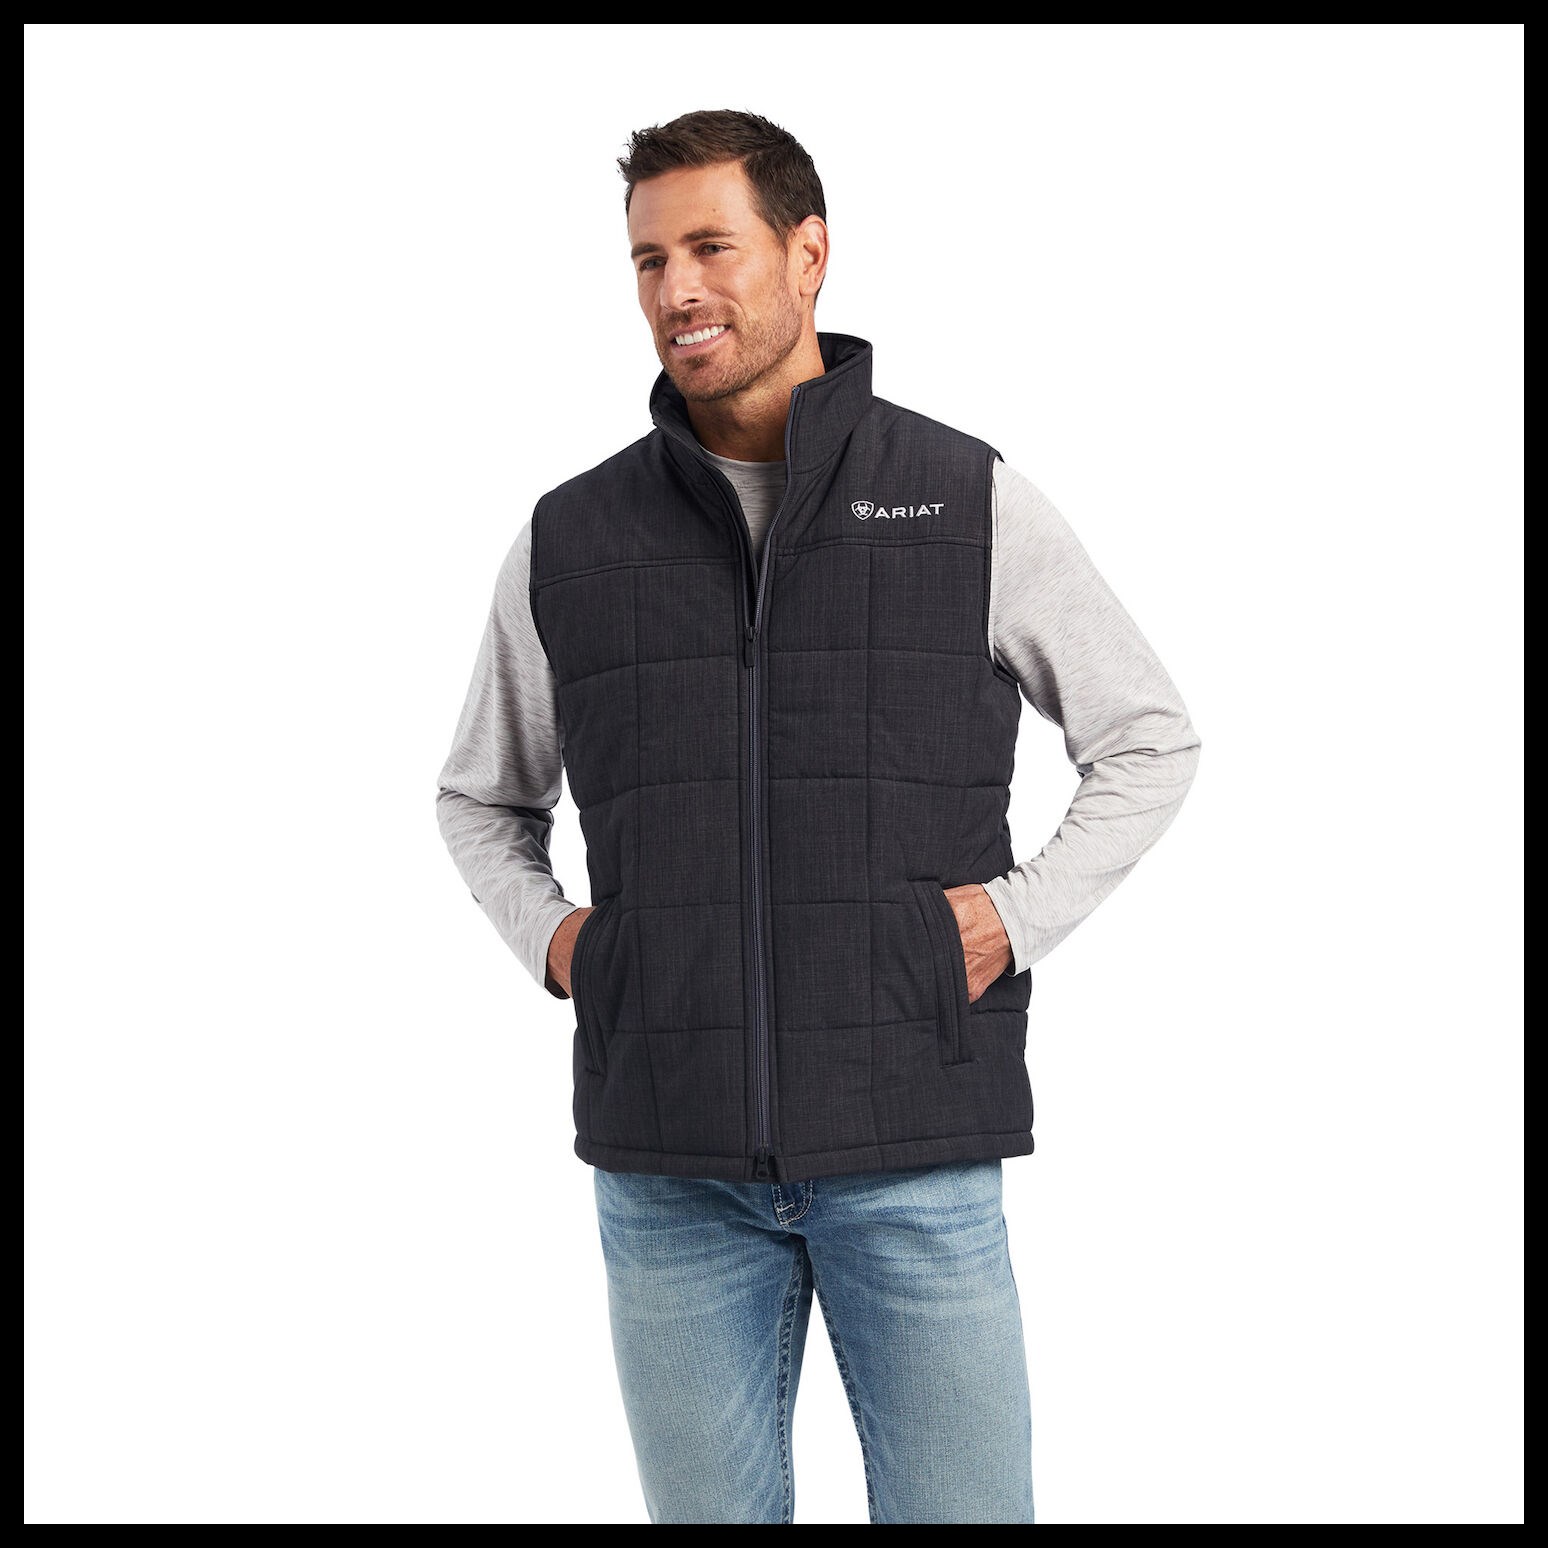 Ariat Men's Crius Insulated Jacket at Tractor Supply Co.